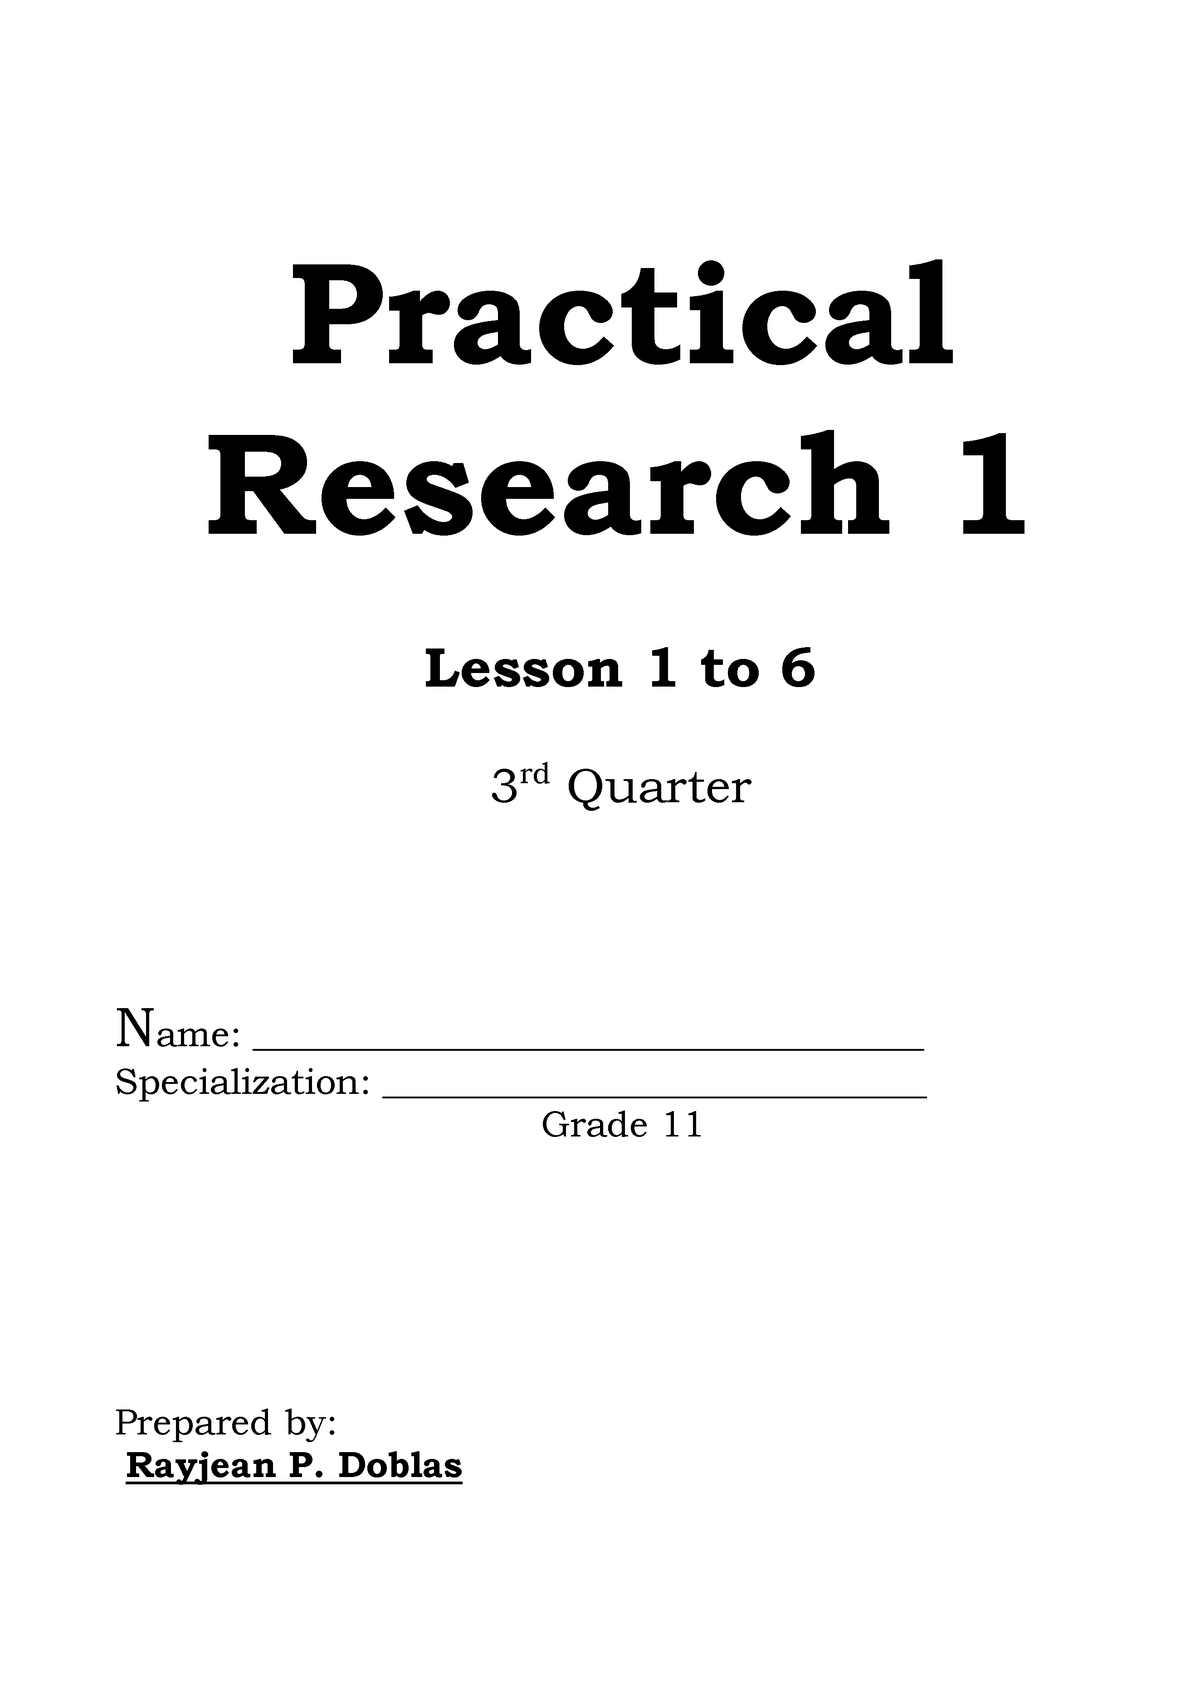 conclusion of practical research 1